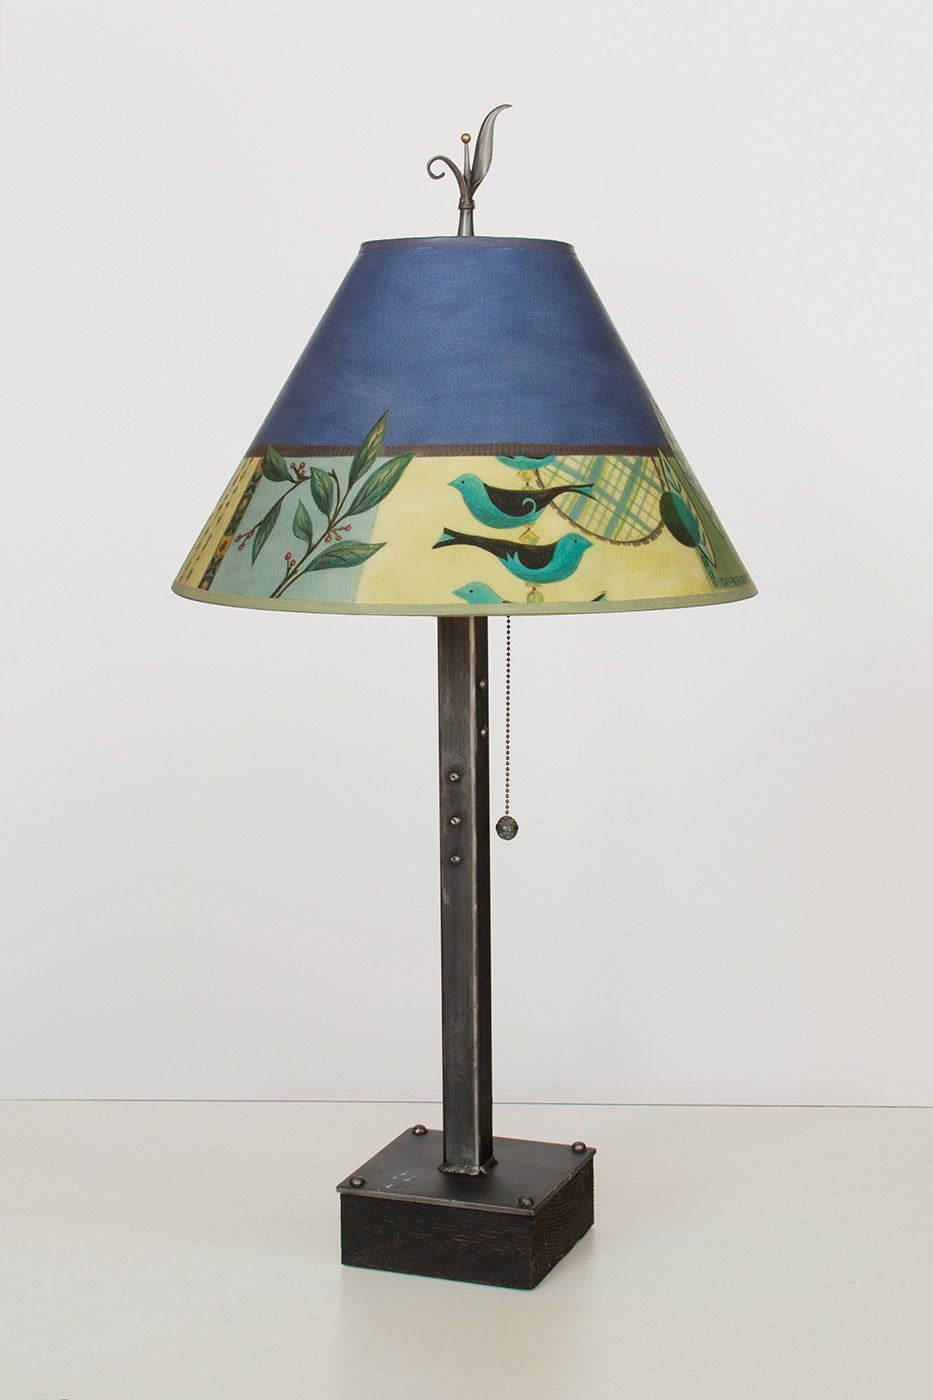 Janna Ugone & Co Table Lamps Steel Table Lamp on Wood with Medium Conical Shade in New Capri Periwinkle